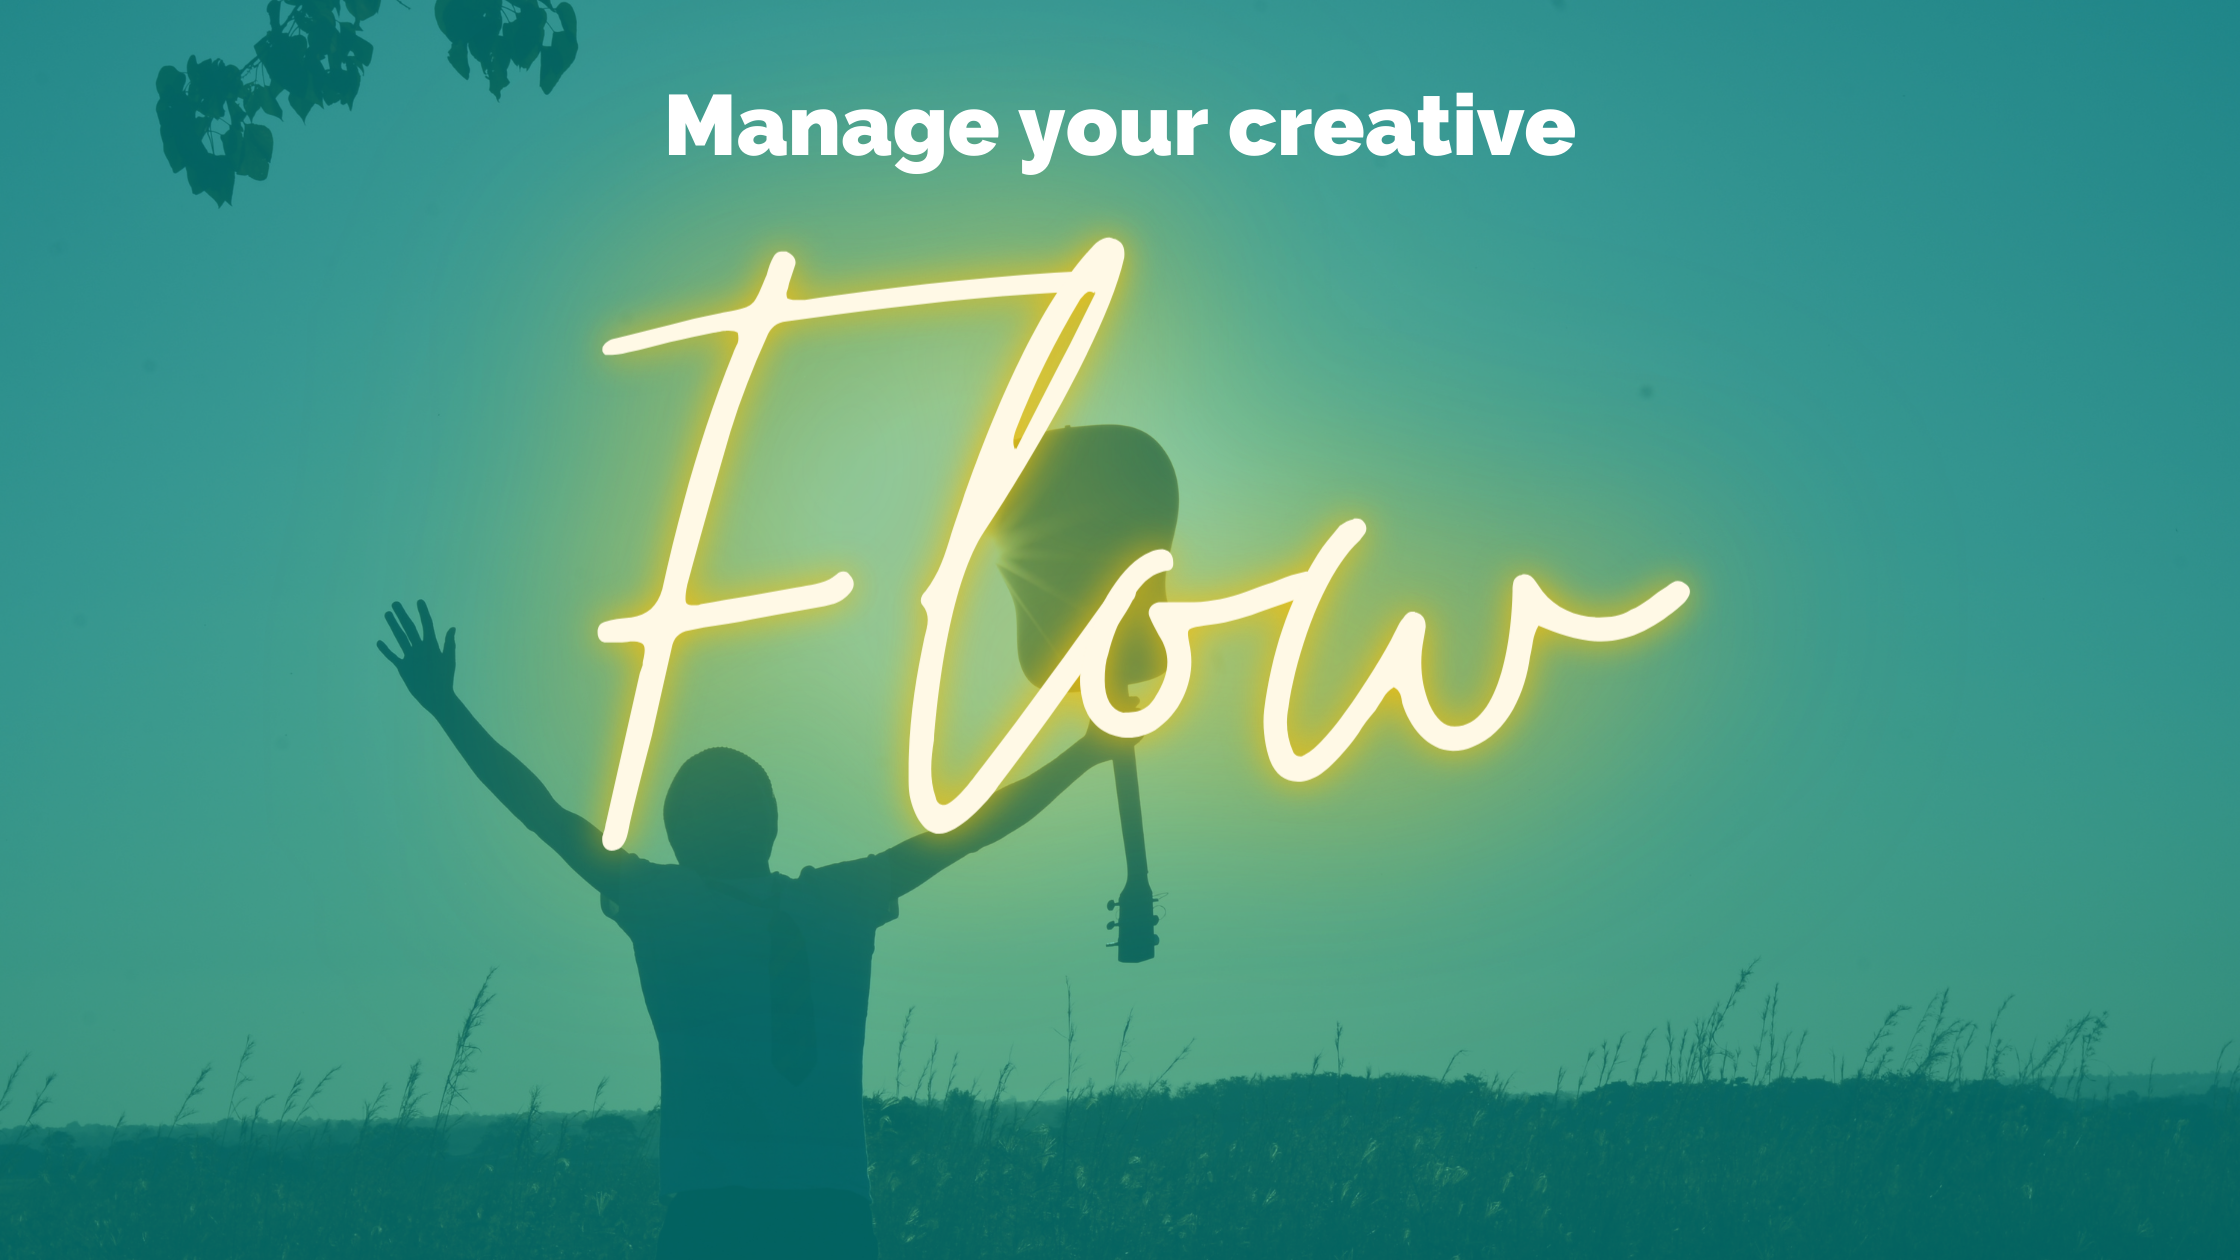 How Songwriters Manage Their Creative Energy with Flow